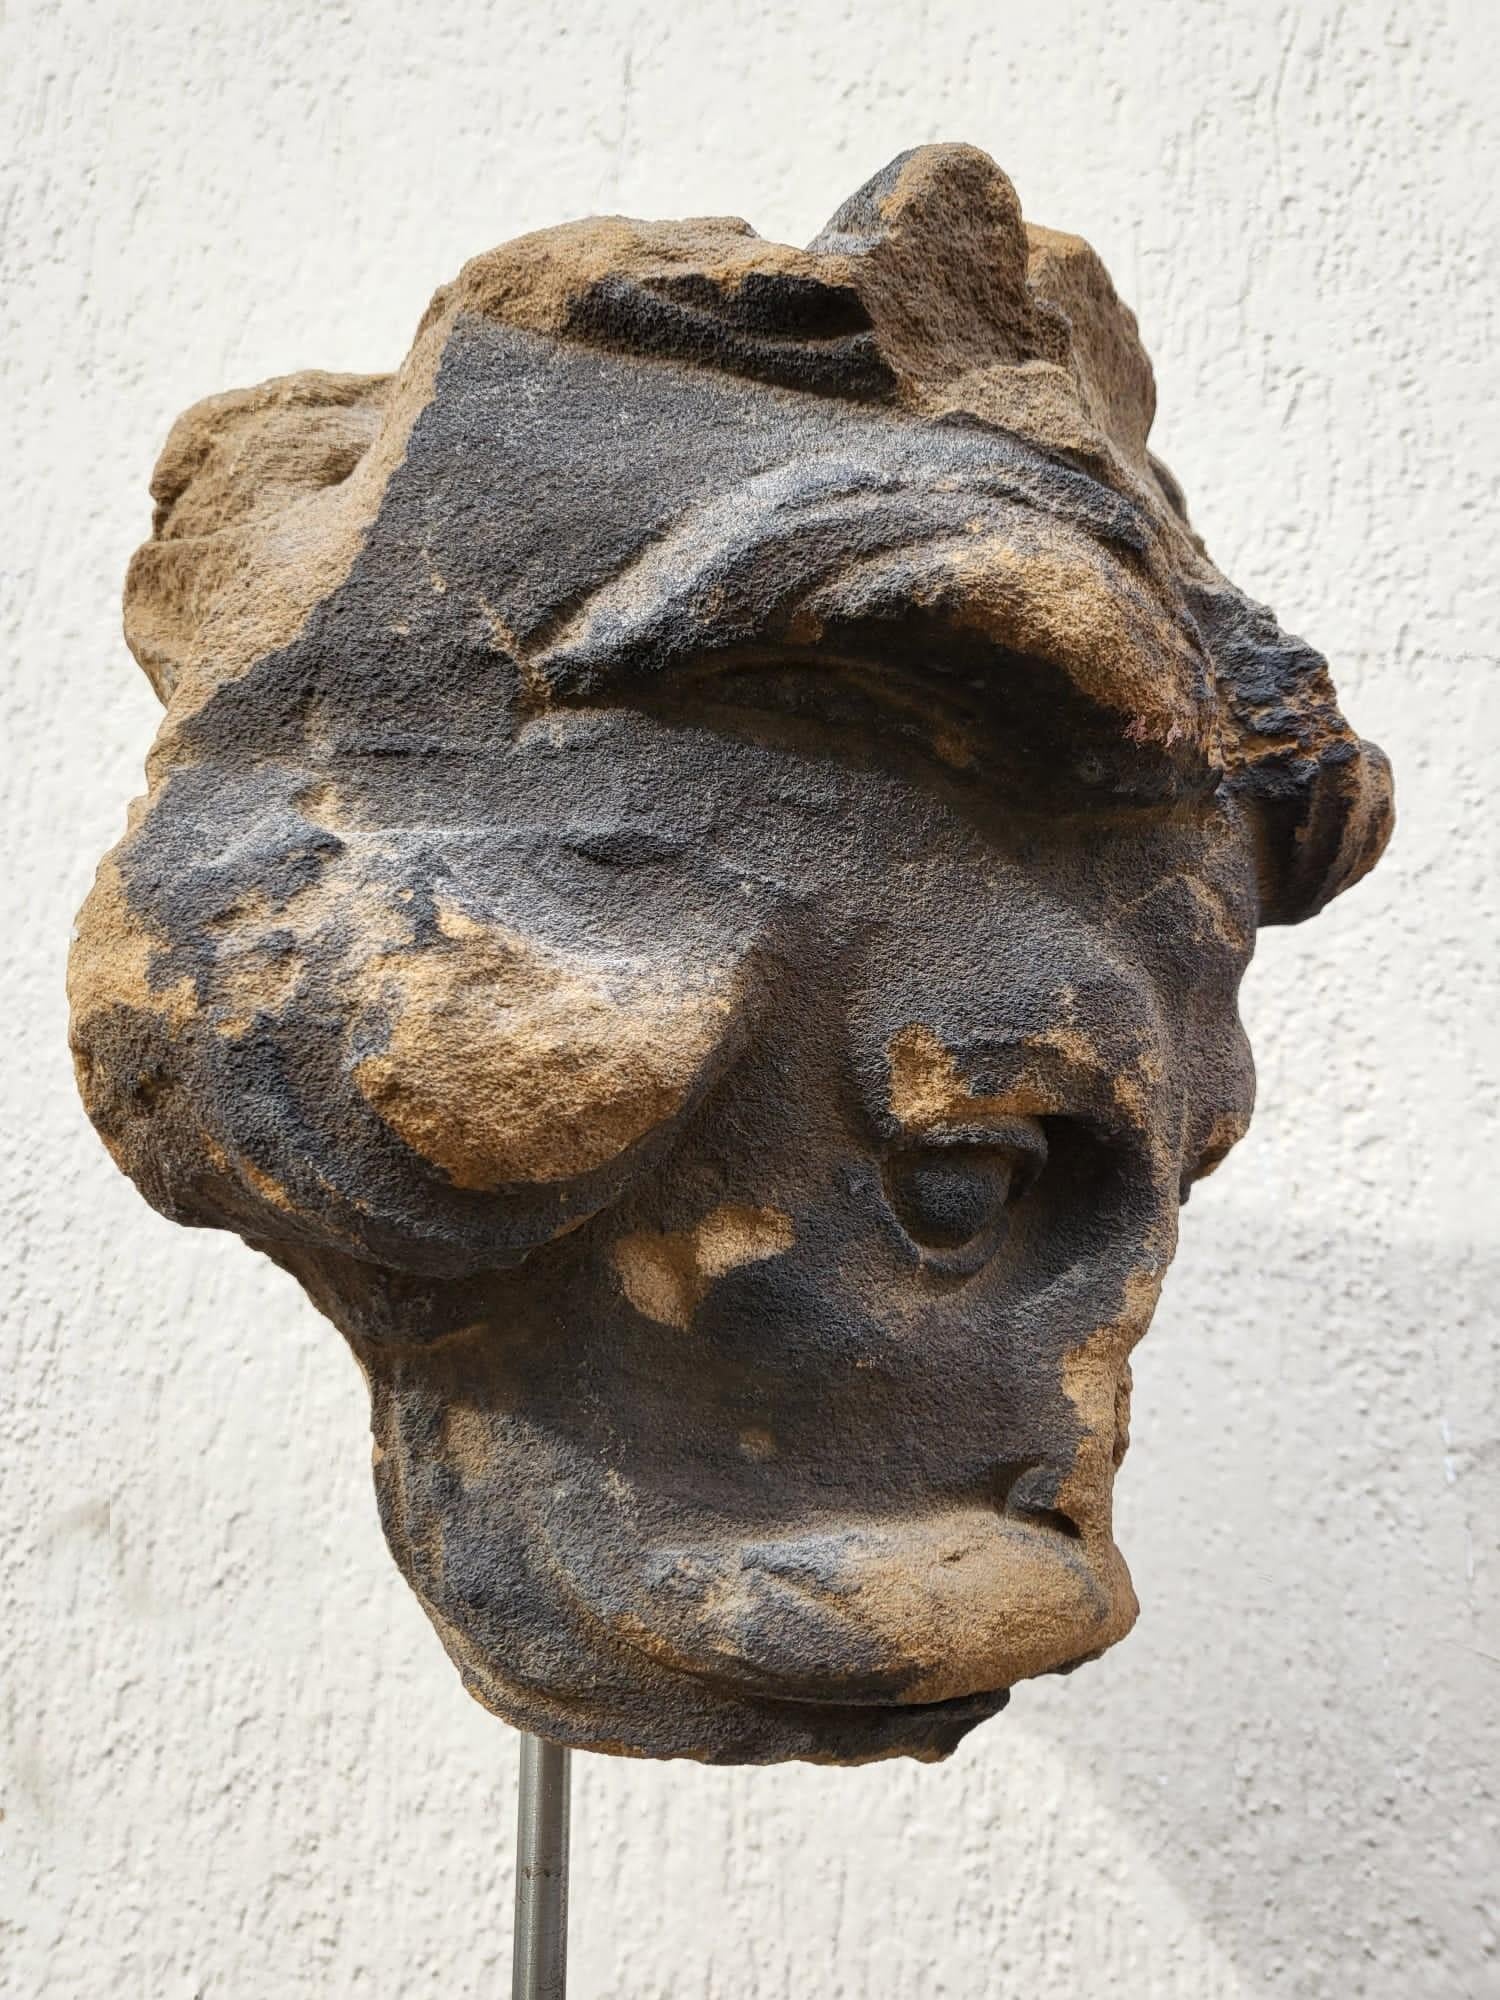 Sculpted stone head on a modern base, of a mustachioed man

According to the 1983 sales certificate, it would be a 17th century sculpture, even before, of United Kingdom or Ireland origin

Total height 46cm
Height of the base 27cm
Diameter of the